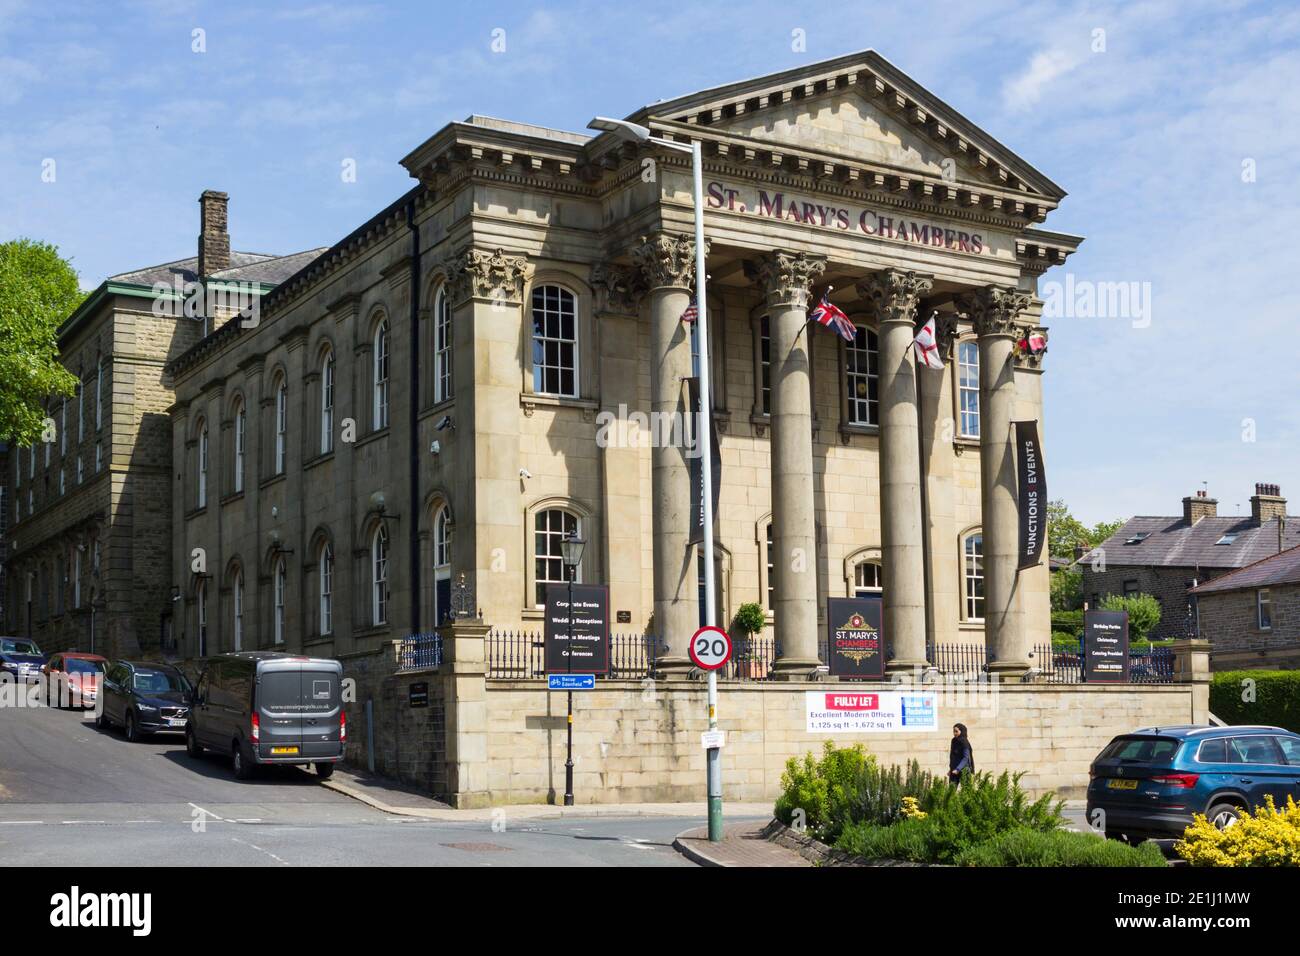 St. Mary's Chambers Rawtenstall. Originally built as a Methodist church in 1856, it is now a live music centre and events venue. Stock Photo